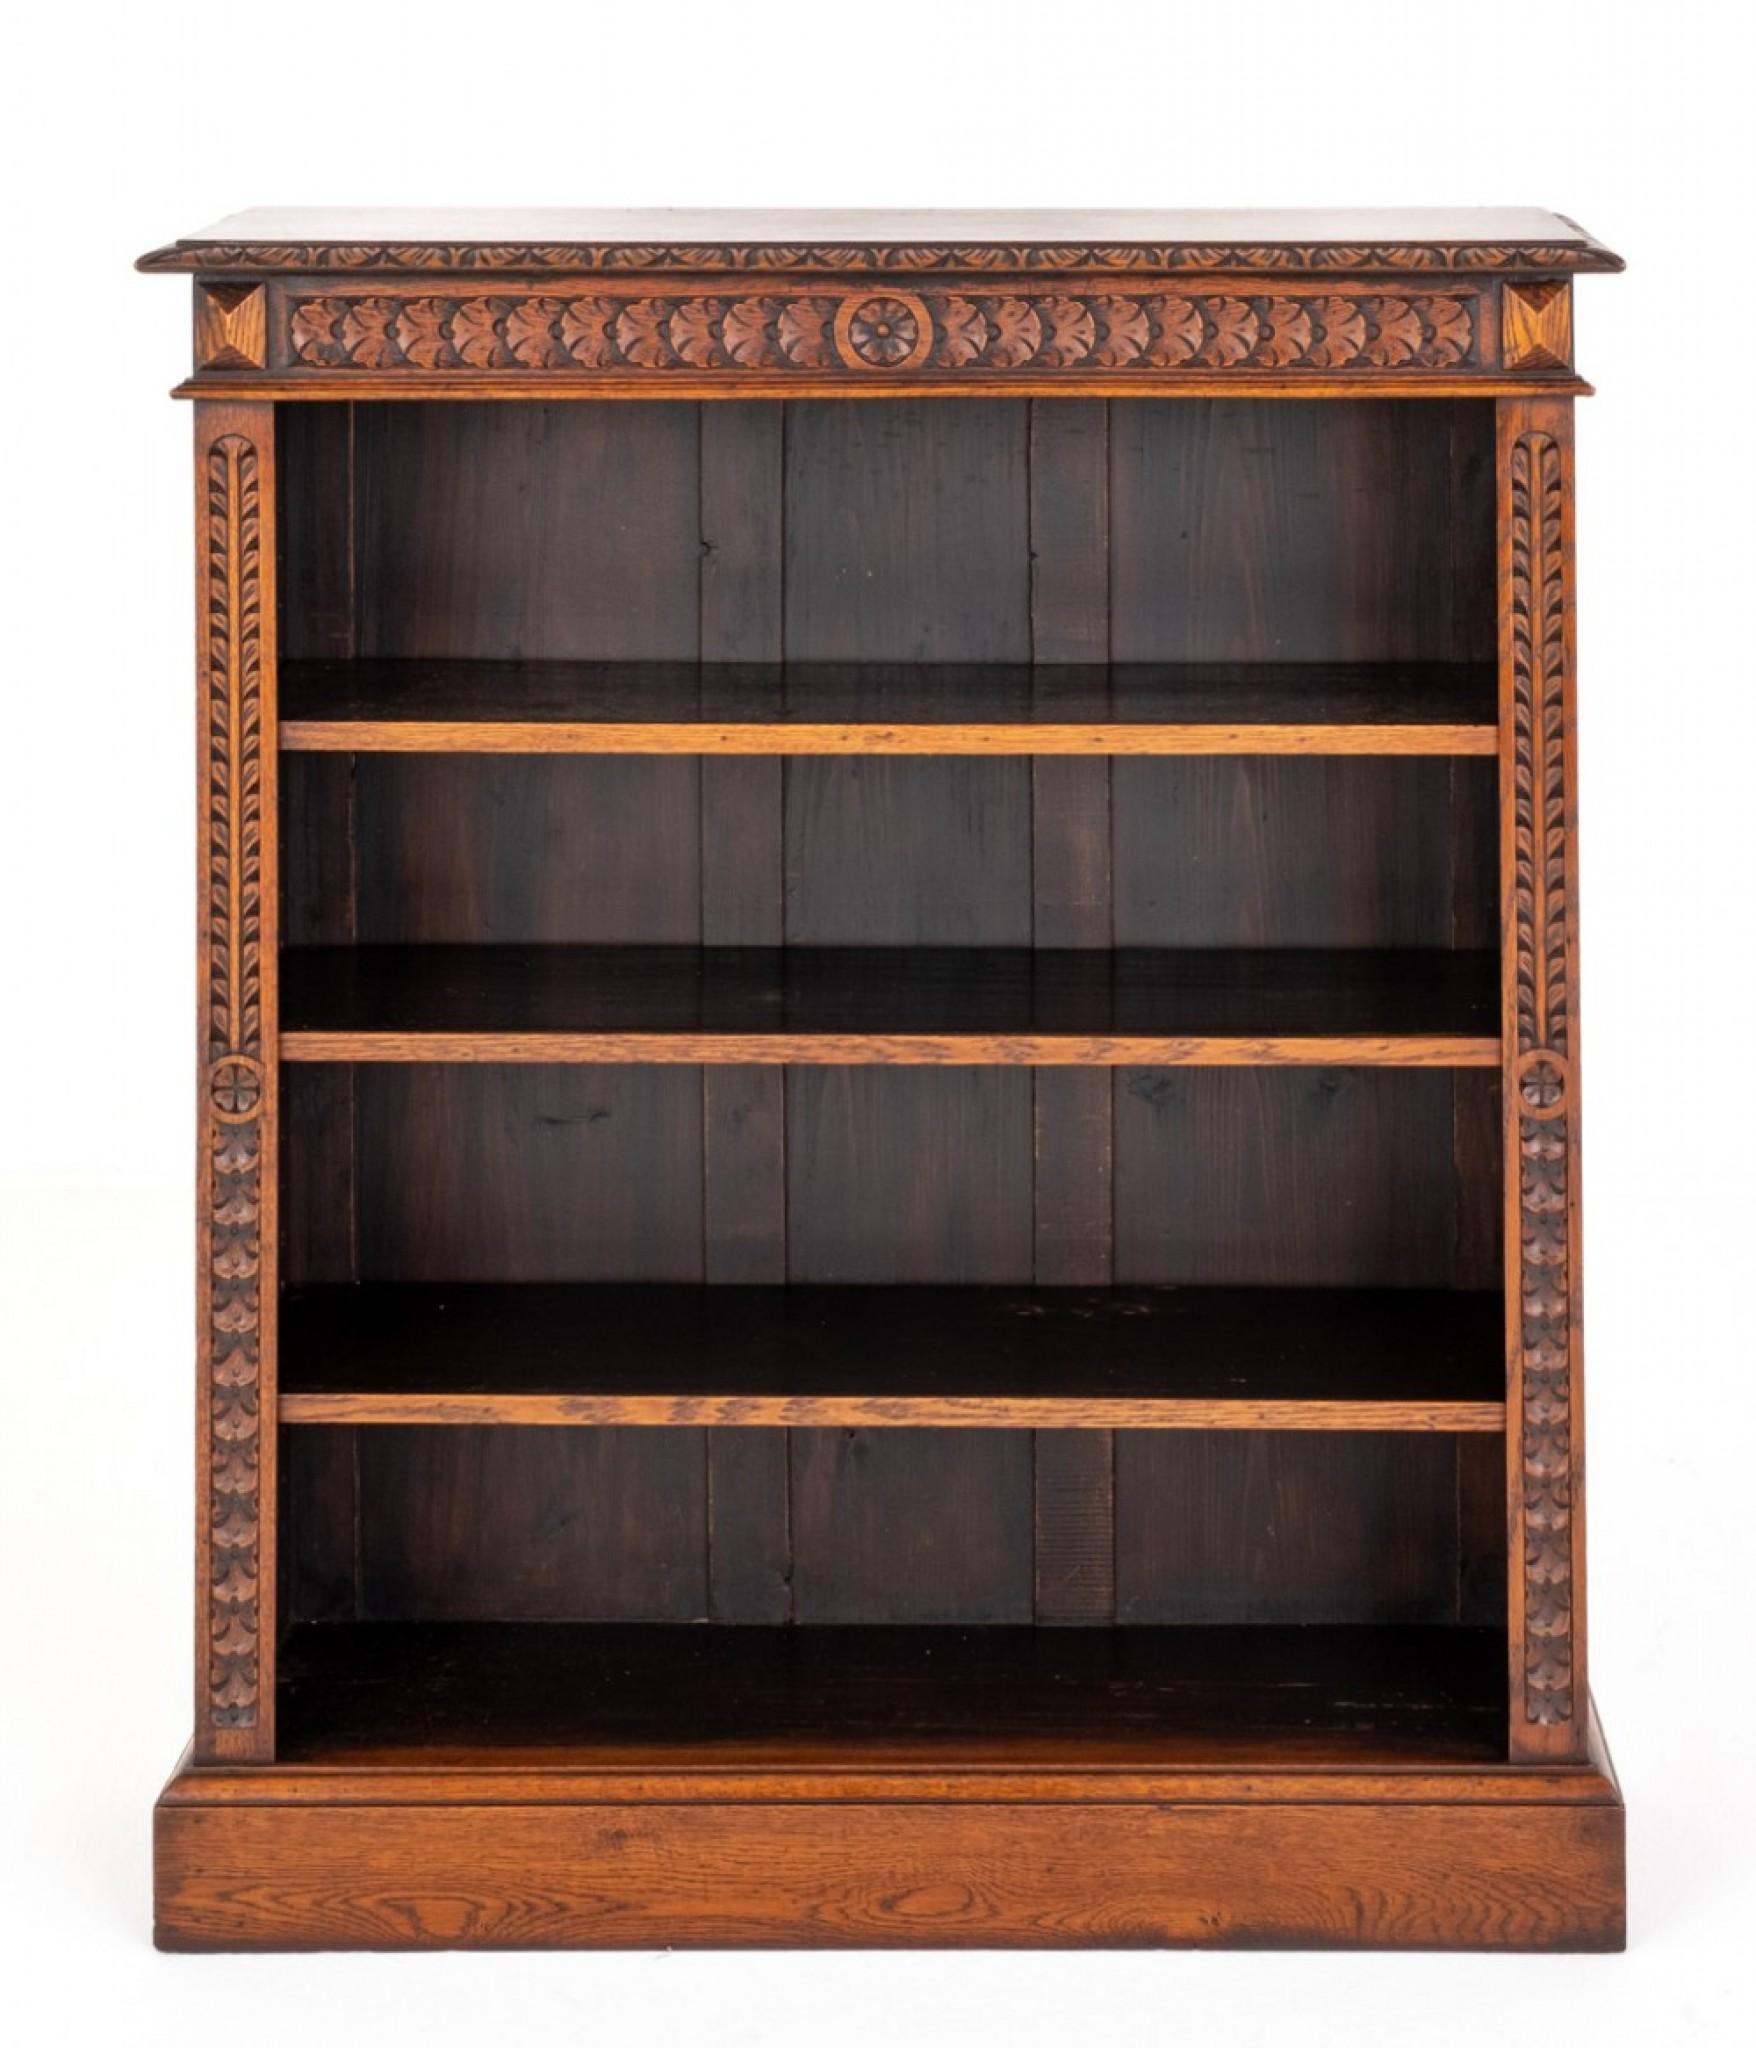 Victorian Carved Oak Open Open Bookcase.
This Bookcase Stands Upon a Plinth Base.
The Bookcase Features 3 Adjustable Shelves Flanked by Carved Uprights.
The Frieze Also Being of a Carved Form.
Presented in Good Condition.